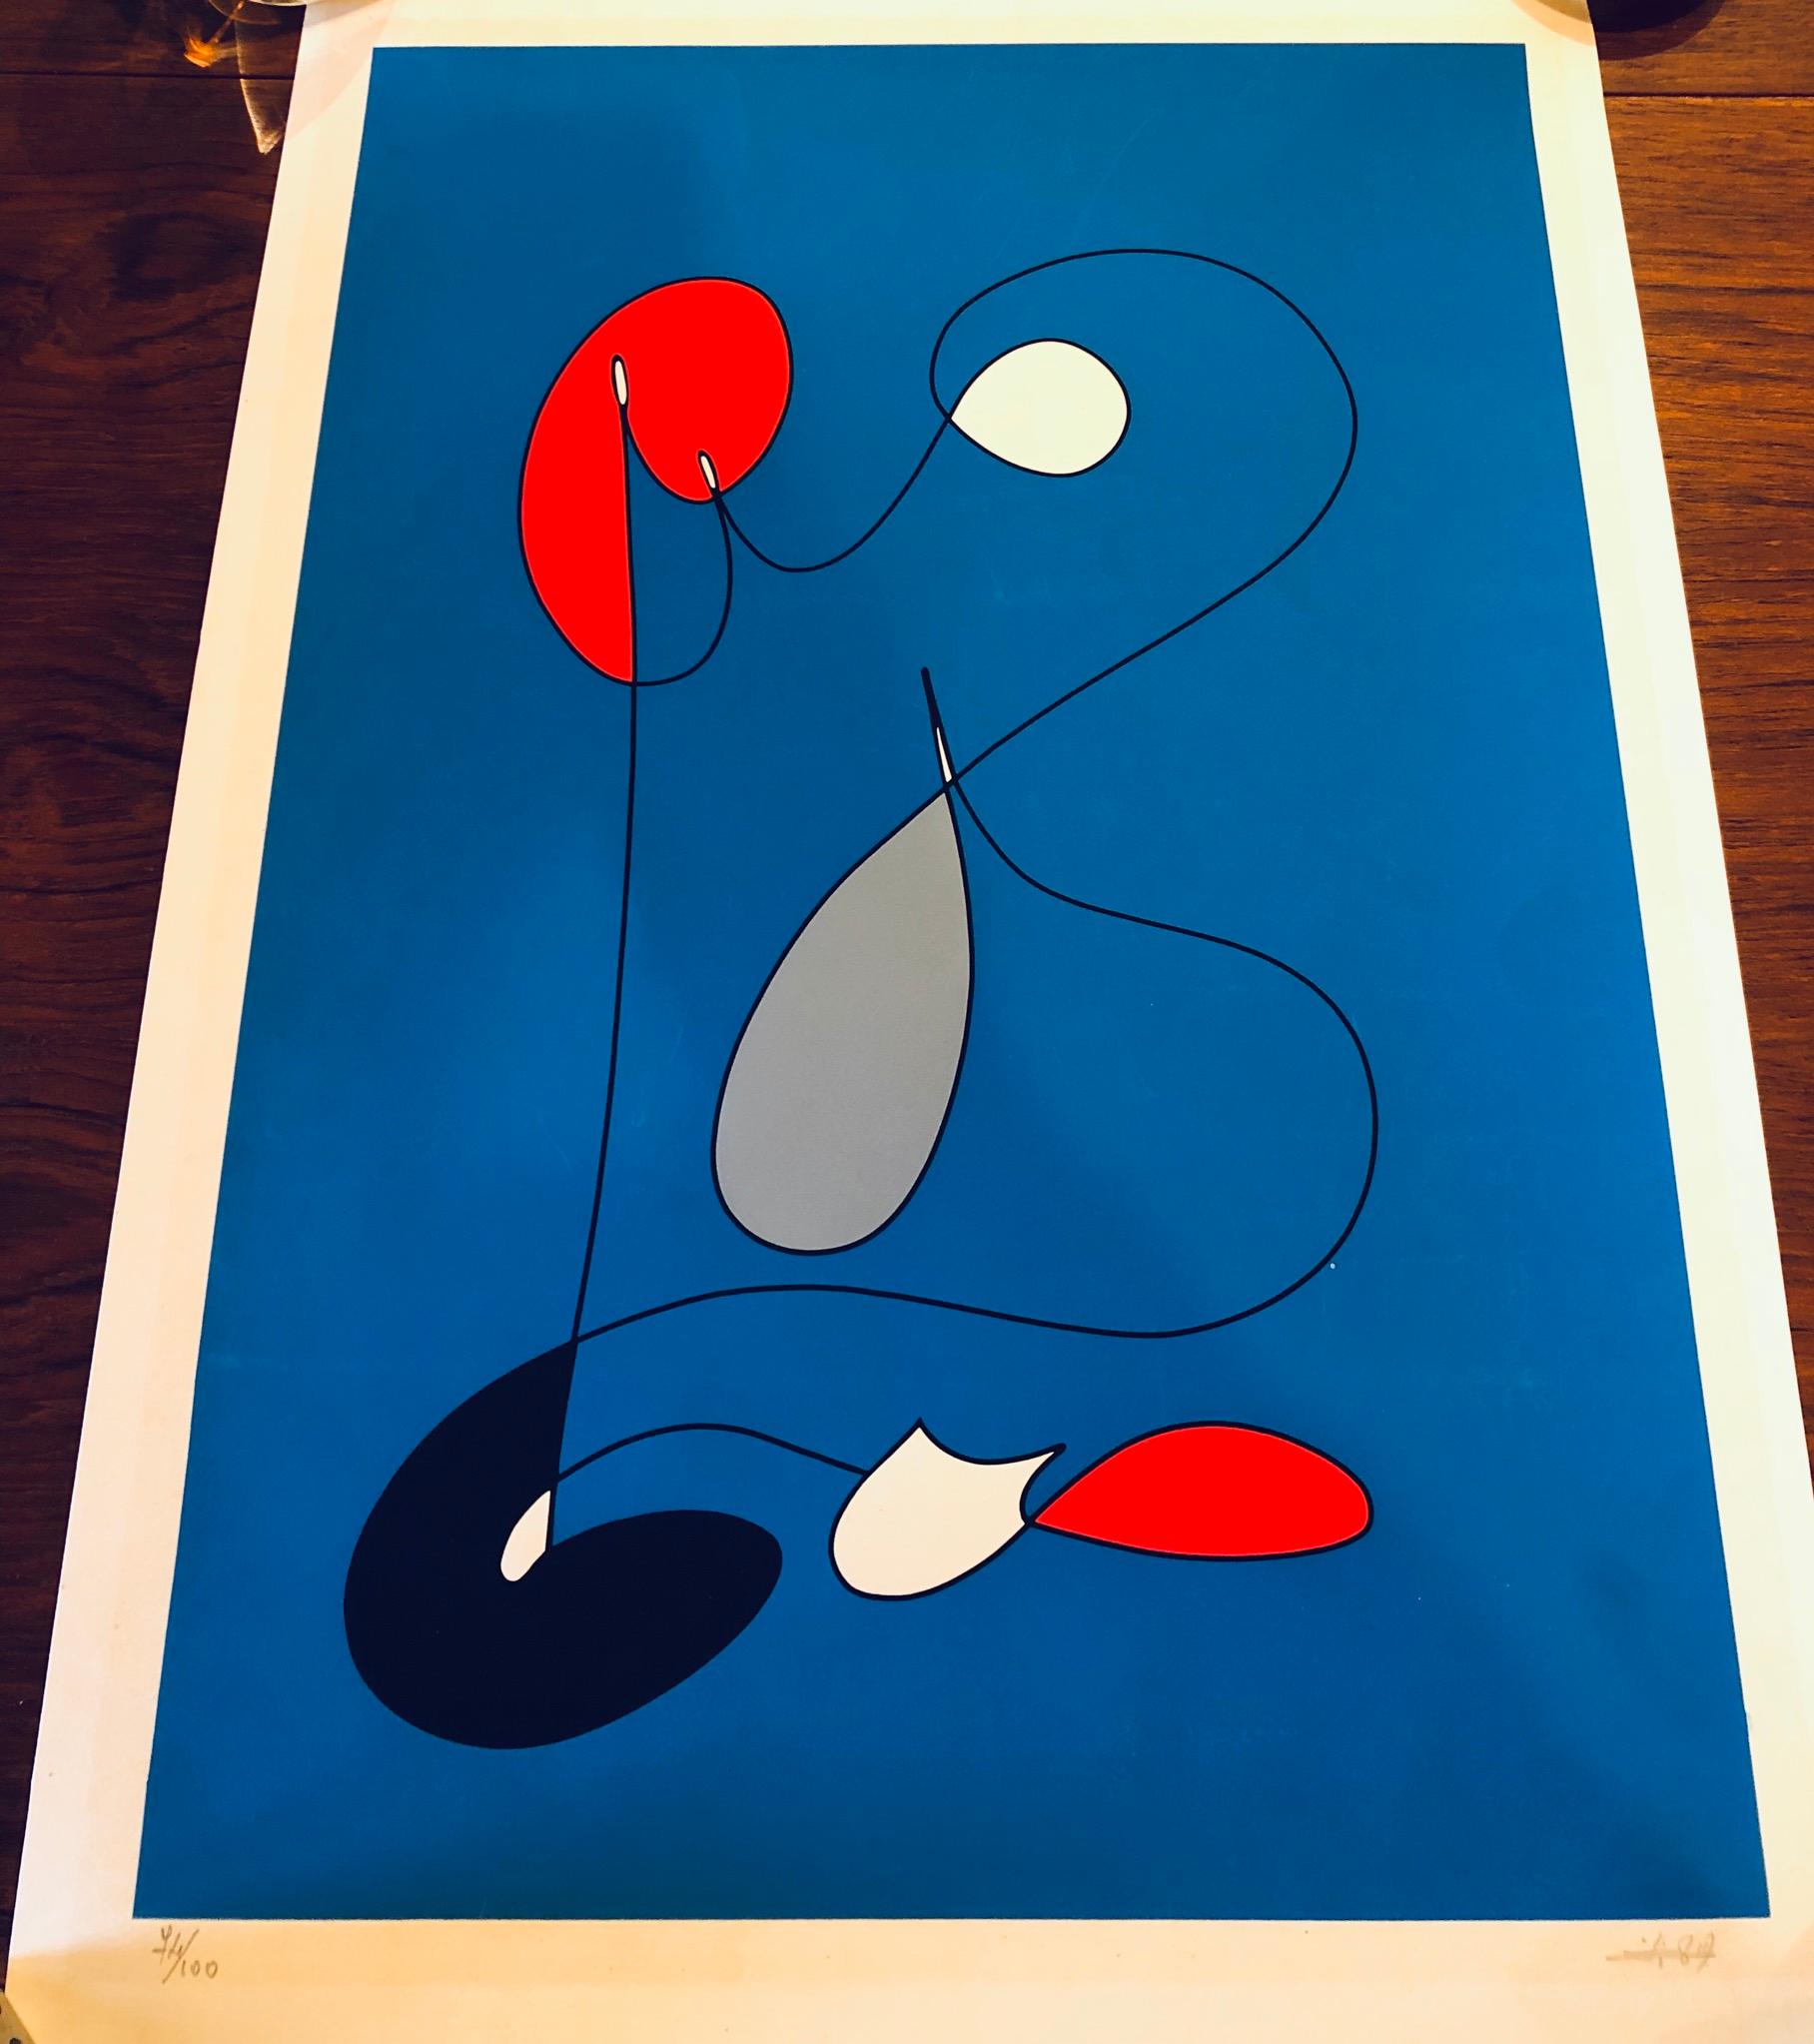 Beautiful abstract modern signed and numbered litho, i can't figure the signature we purchased this item in Italy, 74/100 i knows Italian artist because of the calligraphy in the numbers. The colors and condition are great not faded we are selling